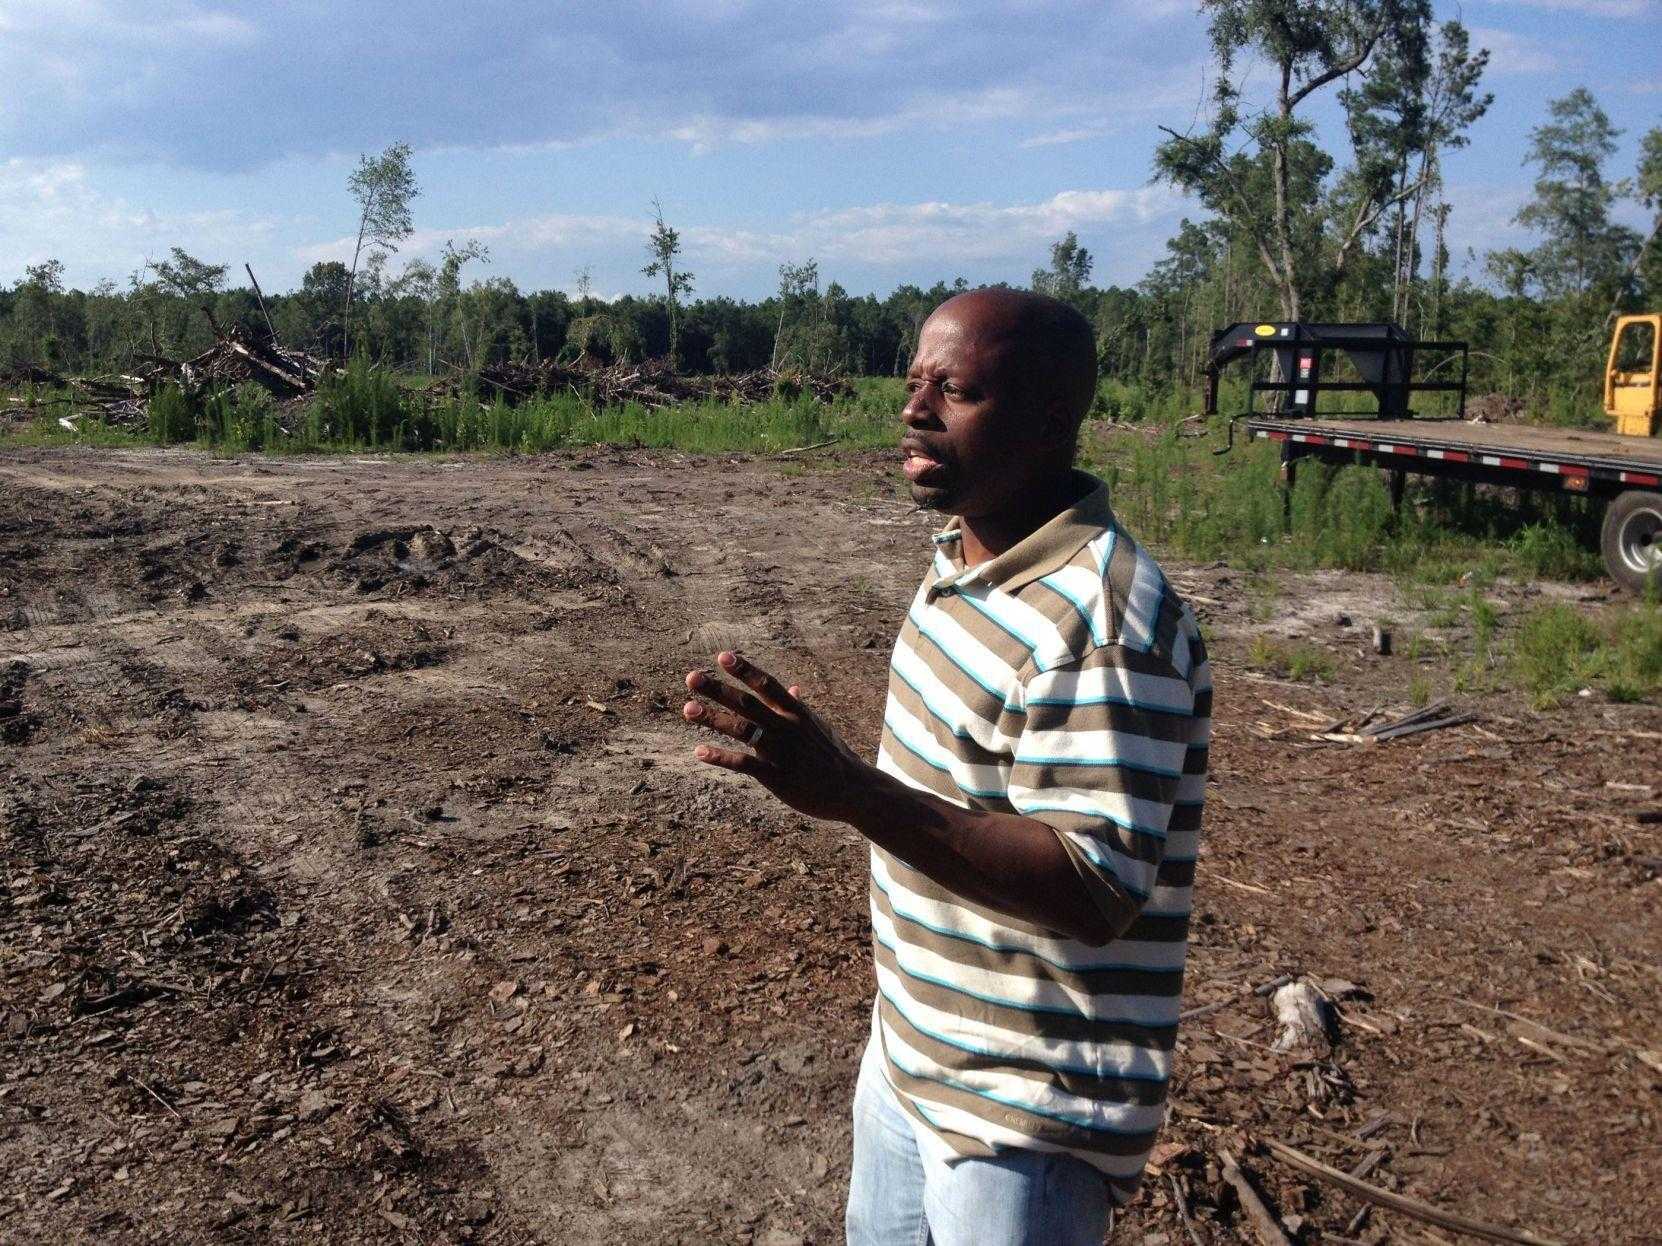 Louis Manigault Jr. talking in a dirt field with trees and greenery behind.